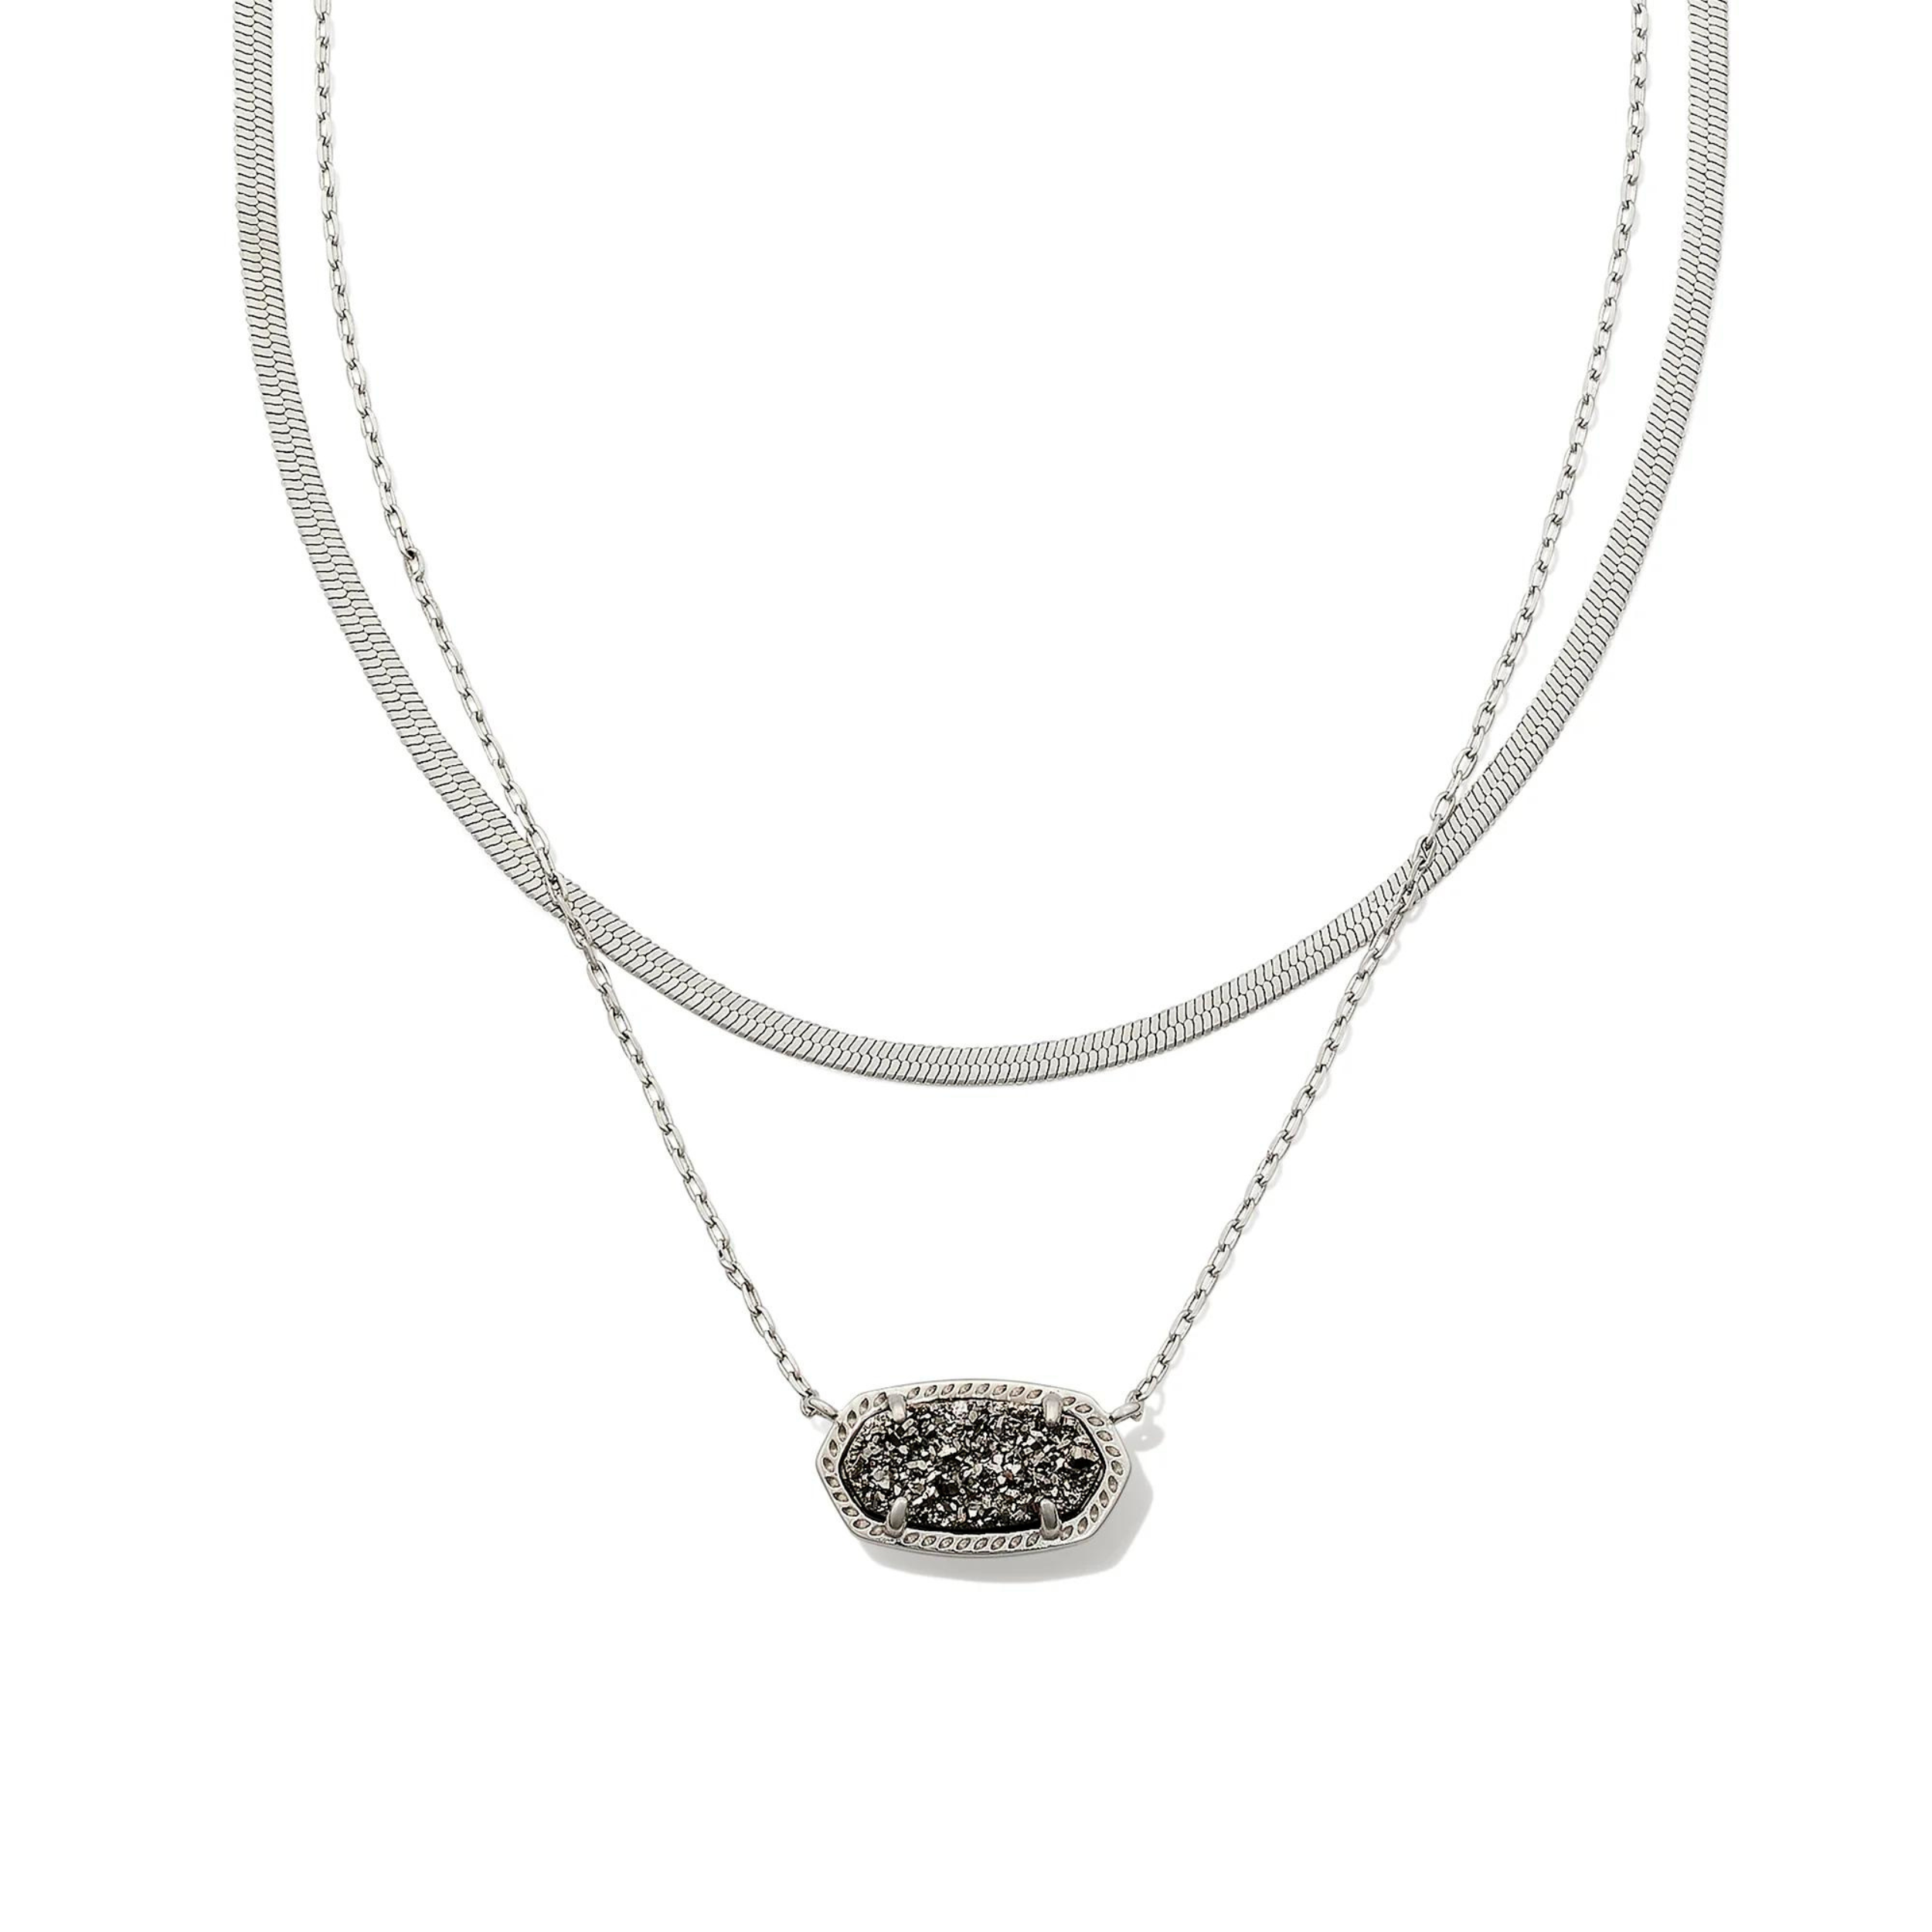 Pictured is a two strand, silver chain necklace with an oval platinum drusy pendant. This necklace is pictured on a white background.    